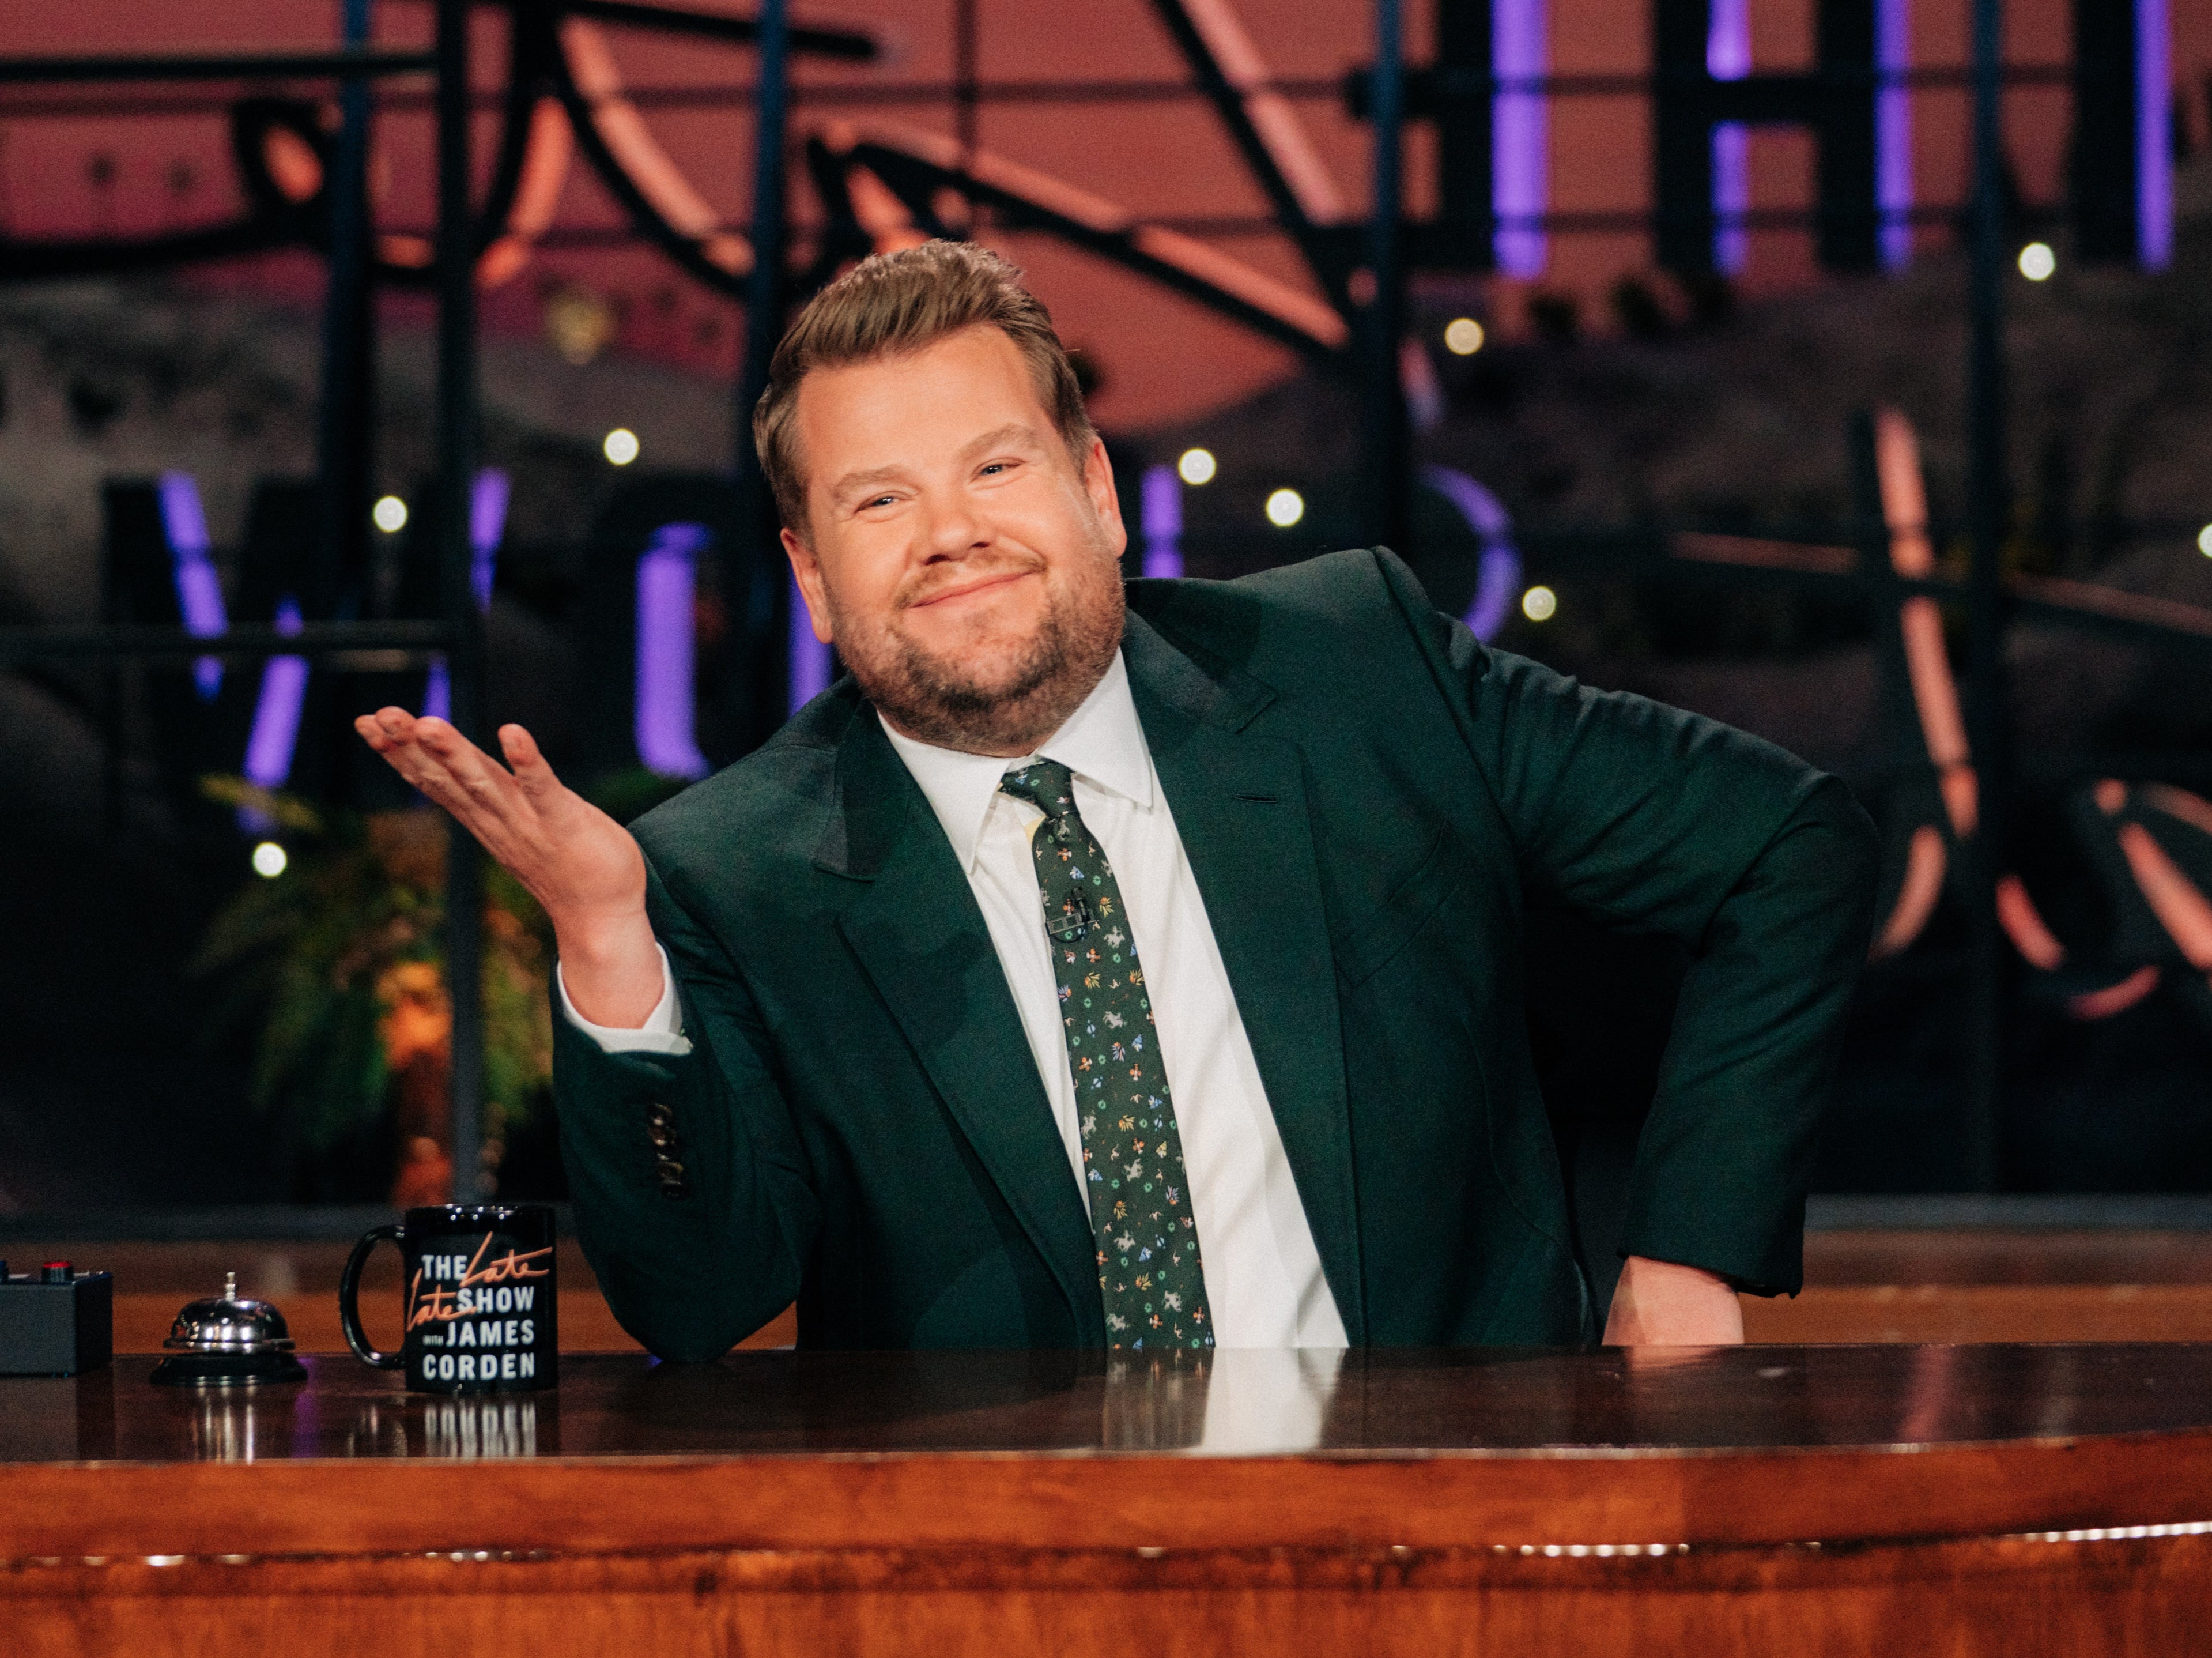 Crossing the Atlantic: James Corden as the host of the late-night US talk show ‘The Late Late Show’